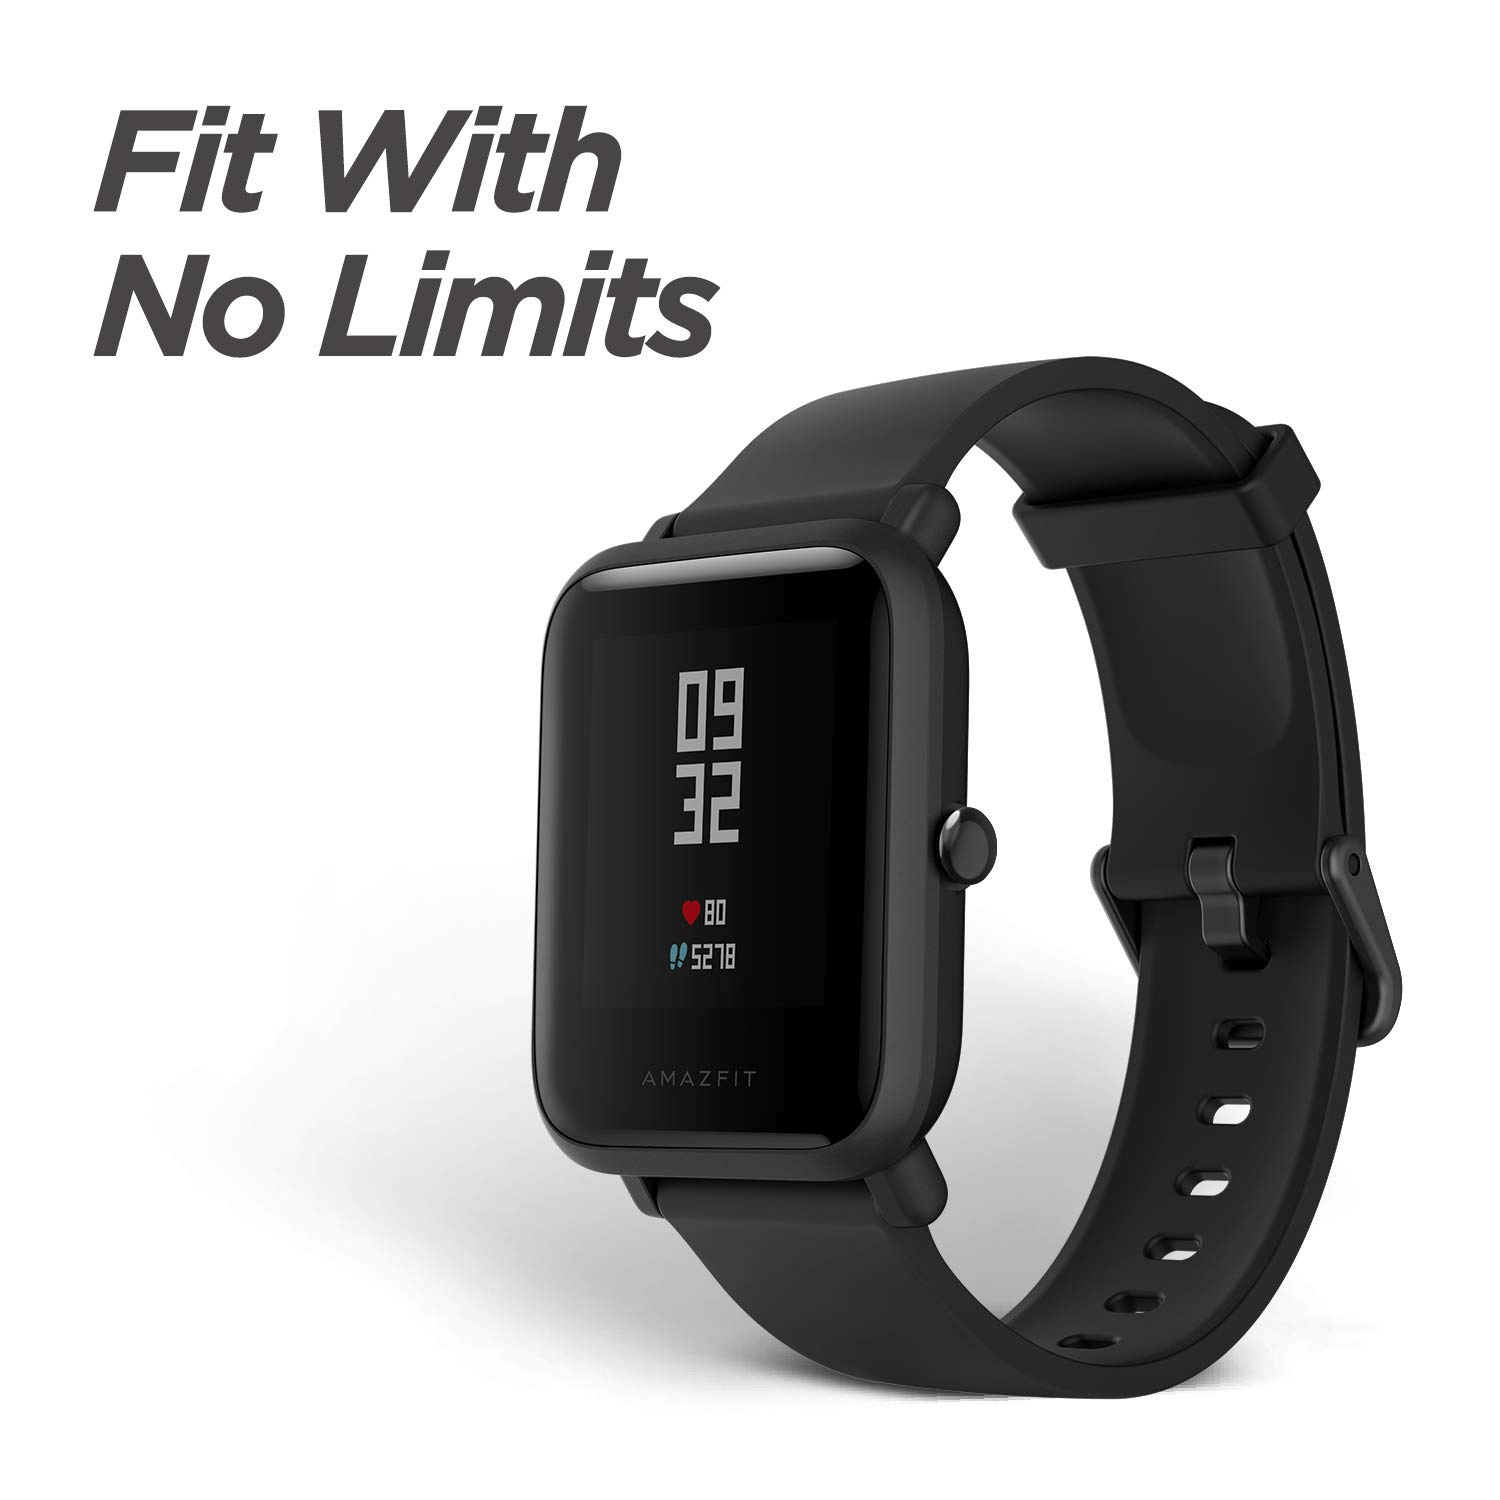 Amazfit Bip LIte 3ATM Water Resistance Smart watch 45 Days Battery Life for Android and ios - Black